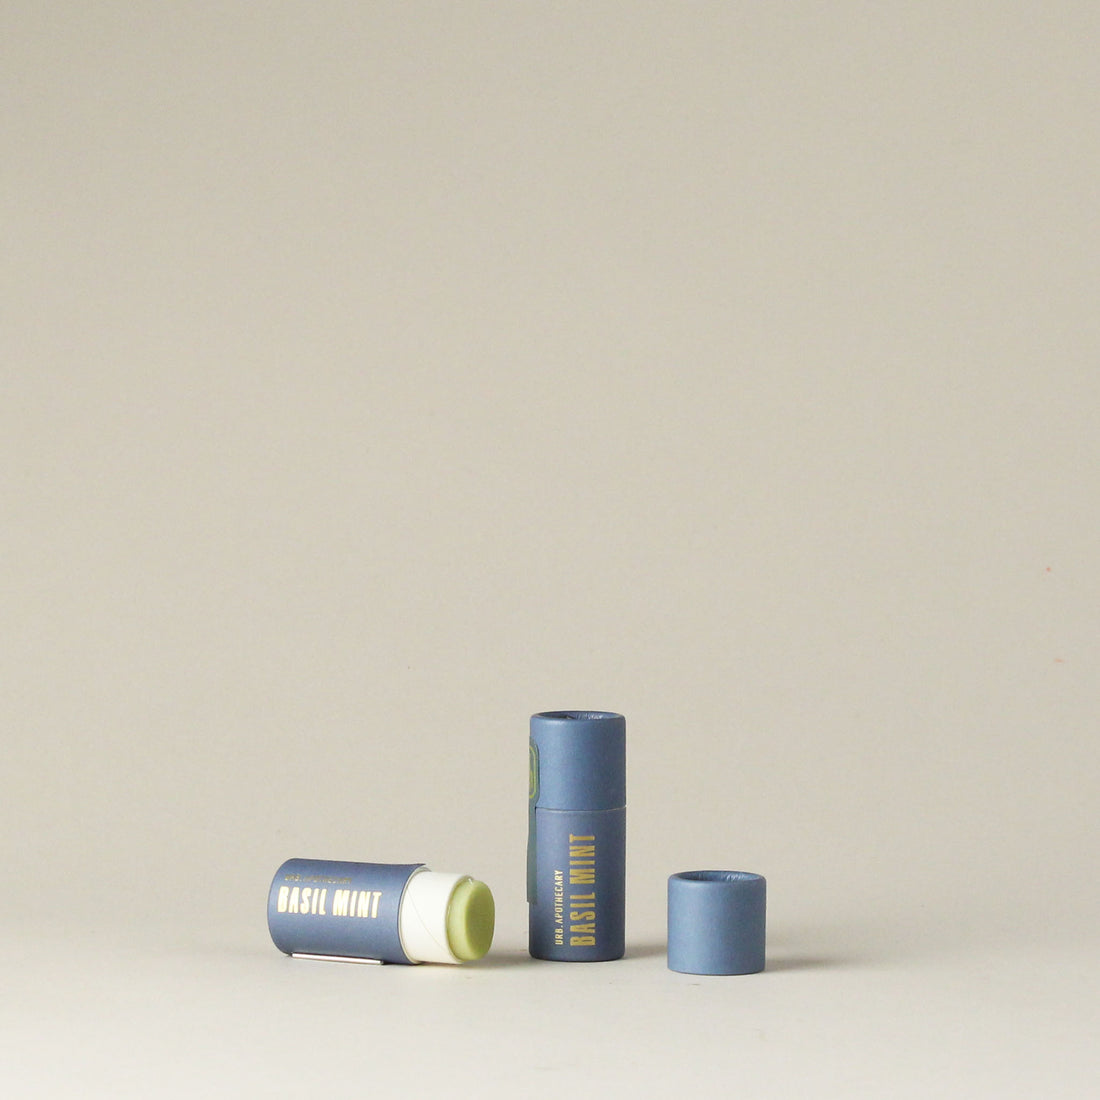 Basil Mint Lip Balm Tubes by URB Apothecary